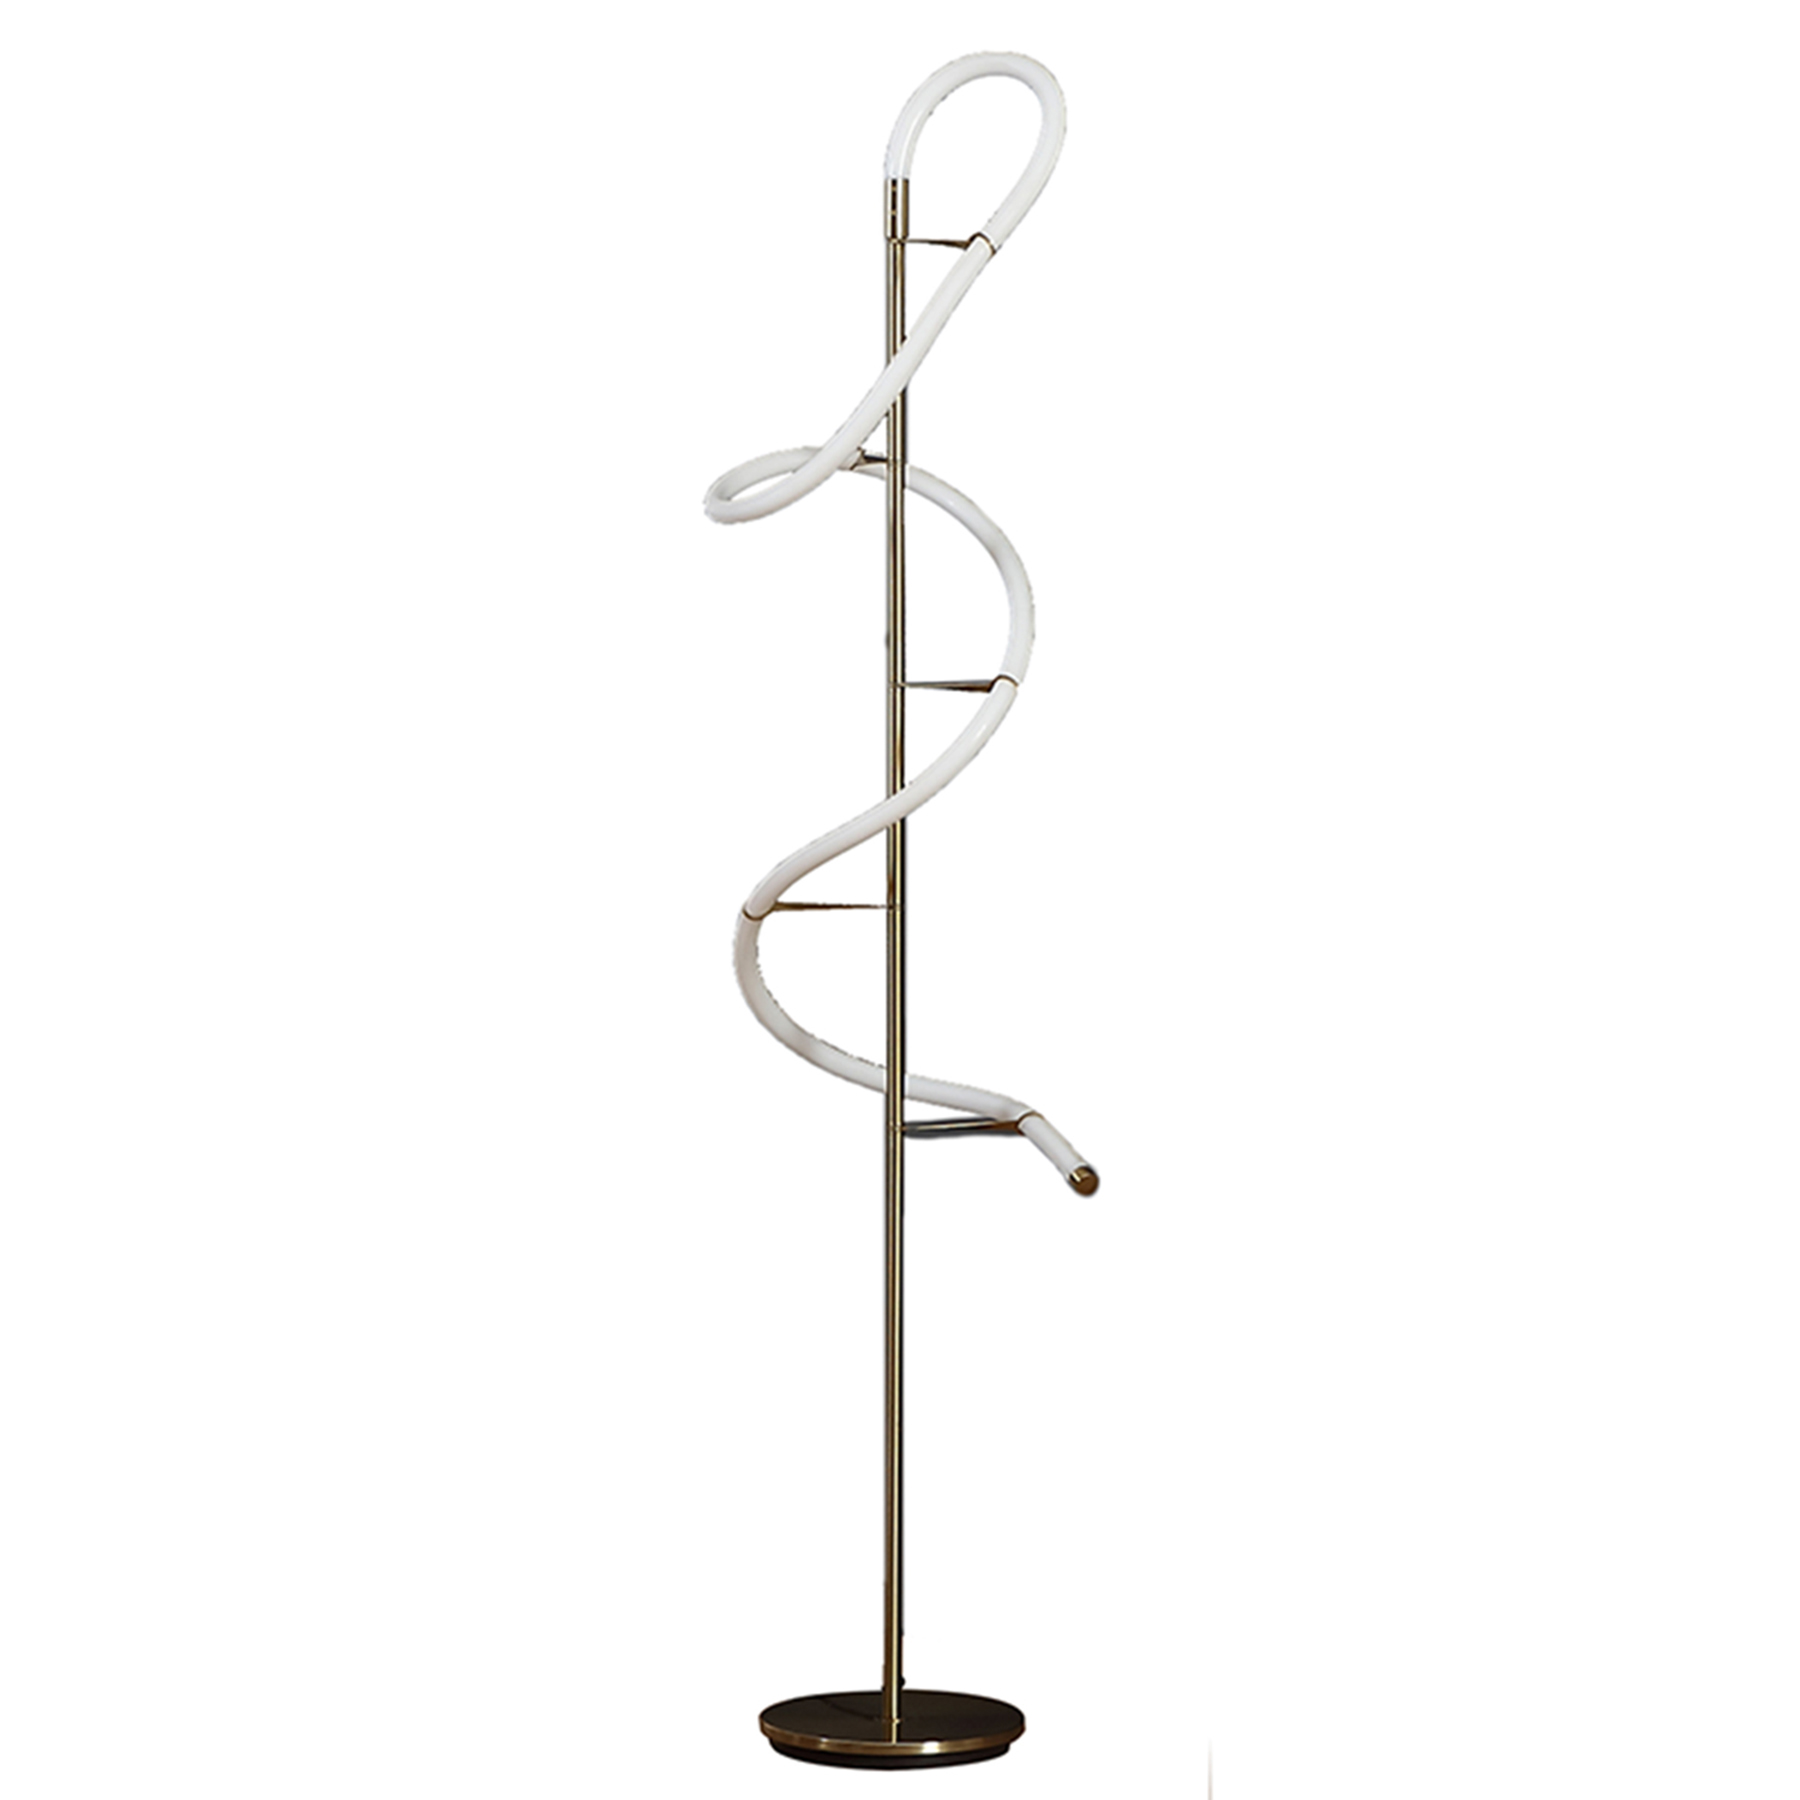 Linear Metal Led Floor Lamp, Curved Pole Light | Goodly Light-GL-FLM063 Featured Image